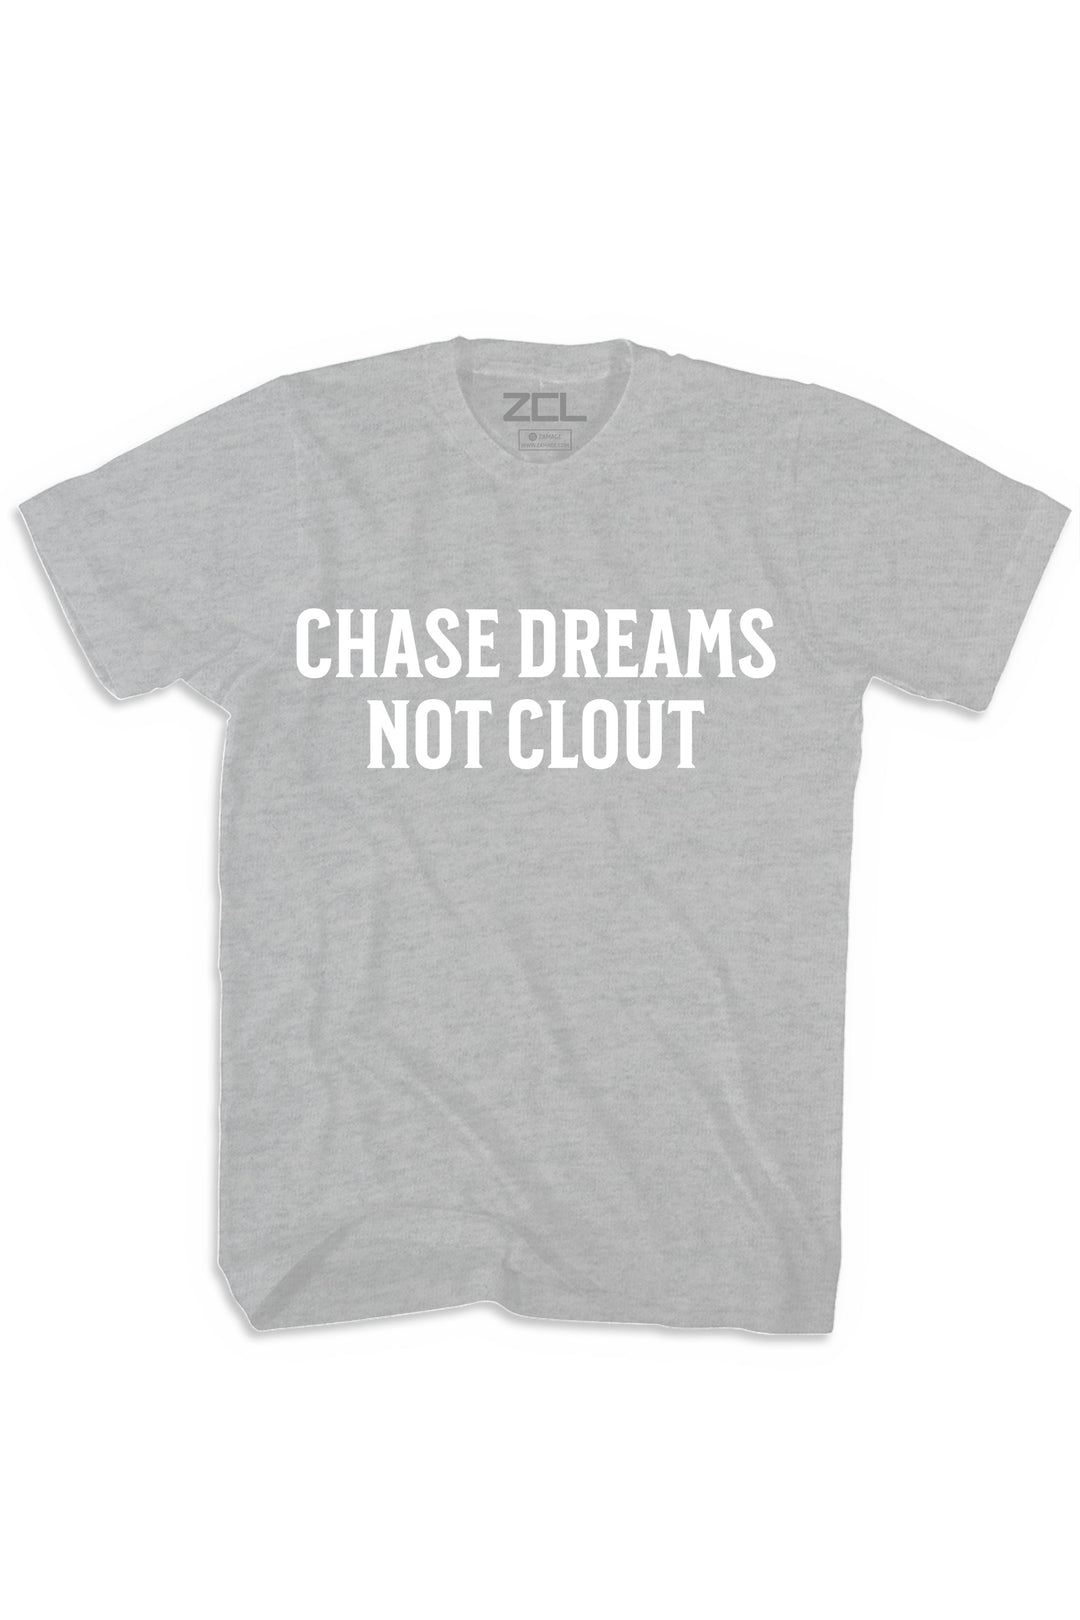 Chase Dreams Not Clout Tee (White Logo) - Zamage